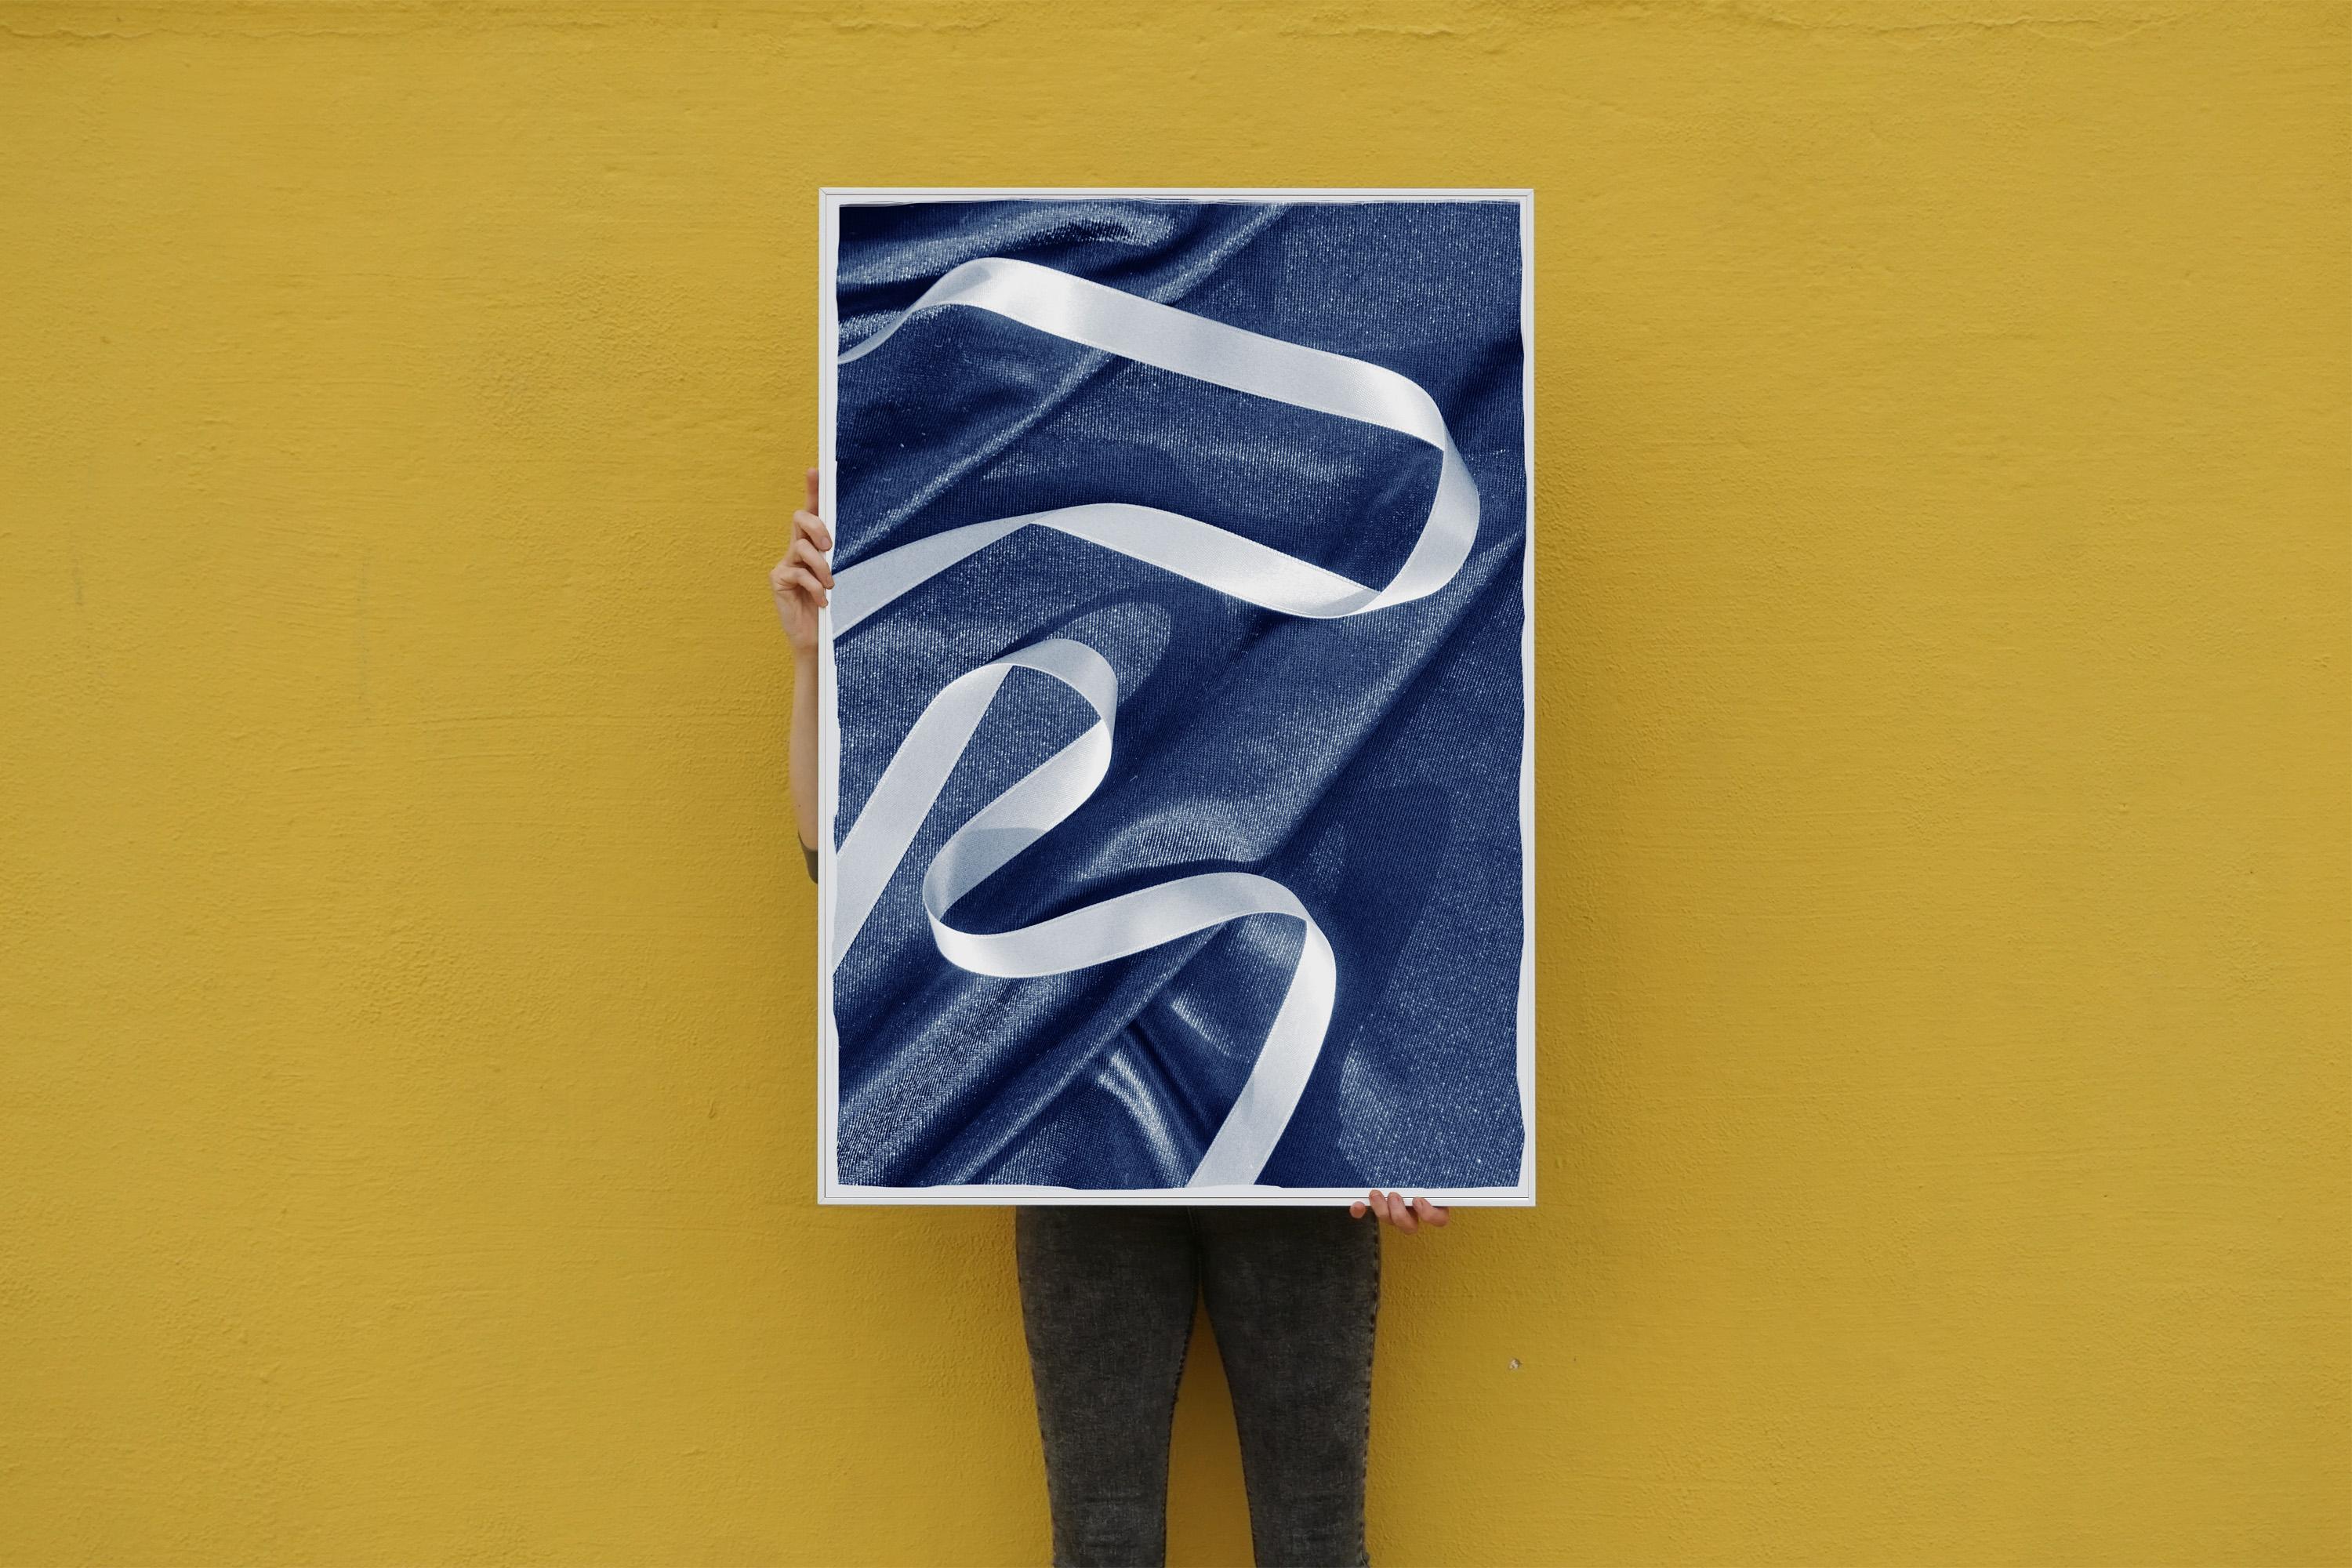 This is an exclusive handprinted limited edition cyanotype.

Details:
+ Title: Classic Blue Cloth with Ribbon
+ Year: 2019
+ Edition Size: 50
+ Stamped and Certificate of Authenticity provided
+ Measurements : 70x100 cm (28x 40 in.), a standard